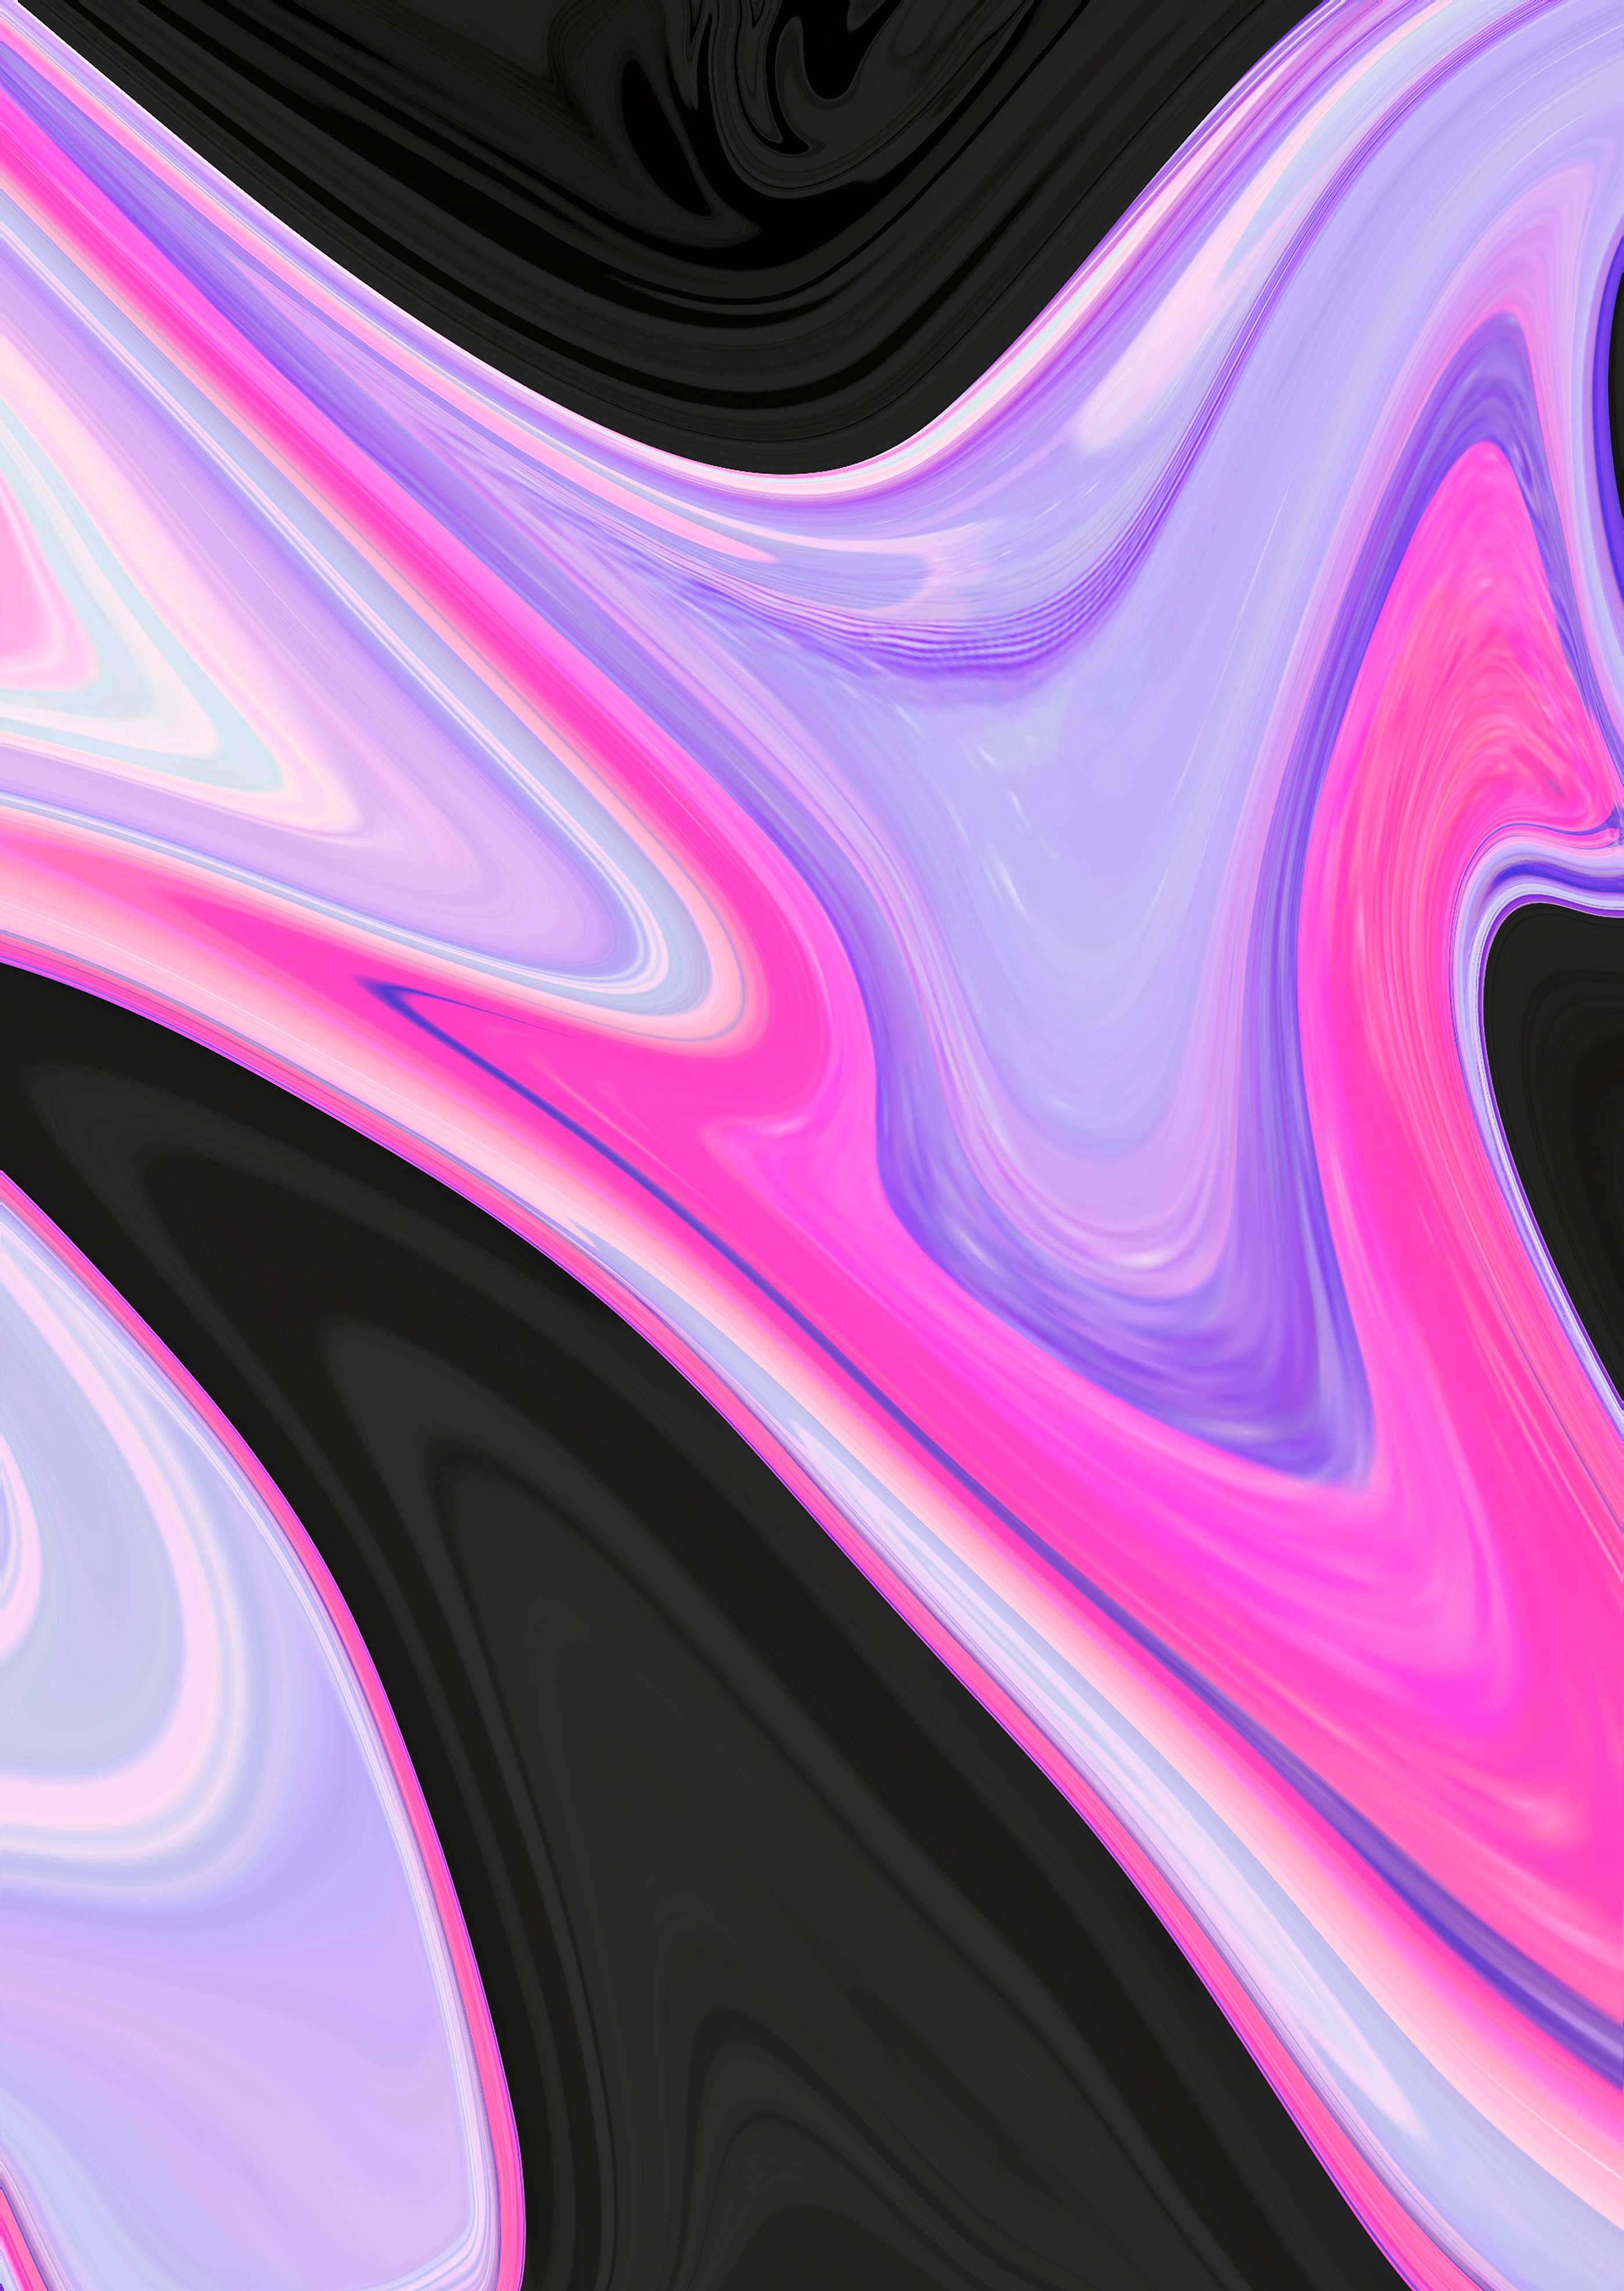 wavy, pink, abstract, black, lines, lilac, paint 32K